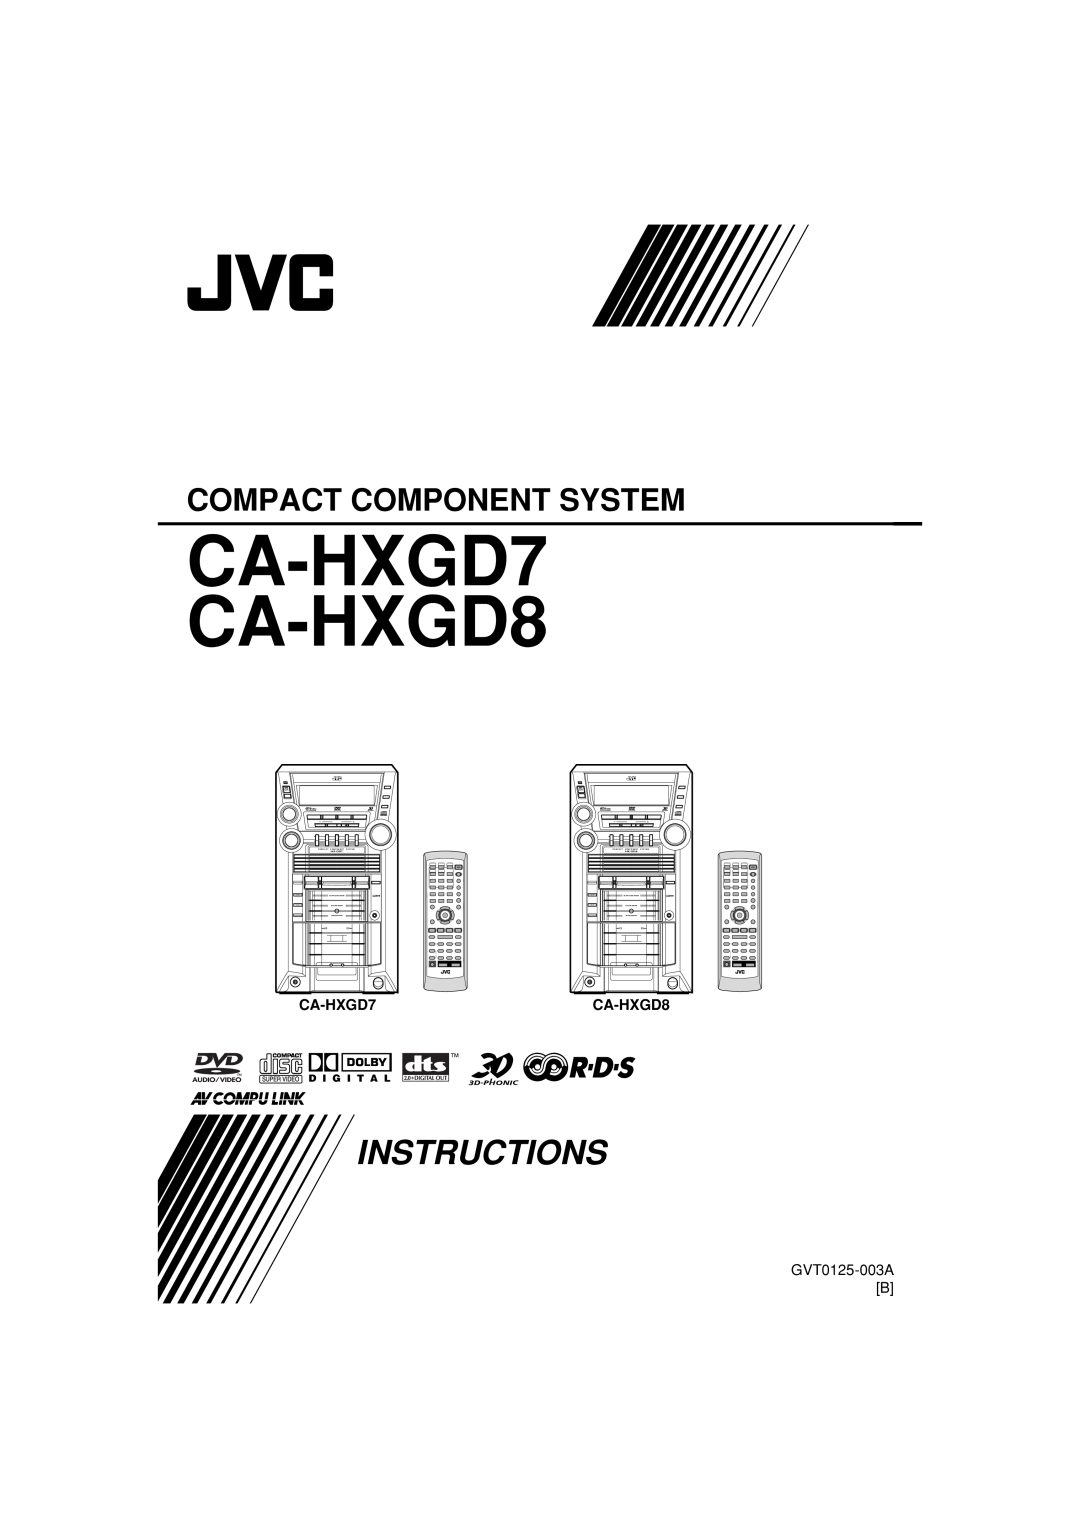 JVC manual GVT0125-003AB, CA-HXGD7 CA-HXGD8, Instructions, Compact Component System, For Customer Use, Model No 